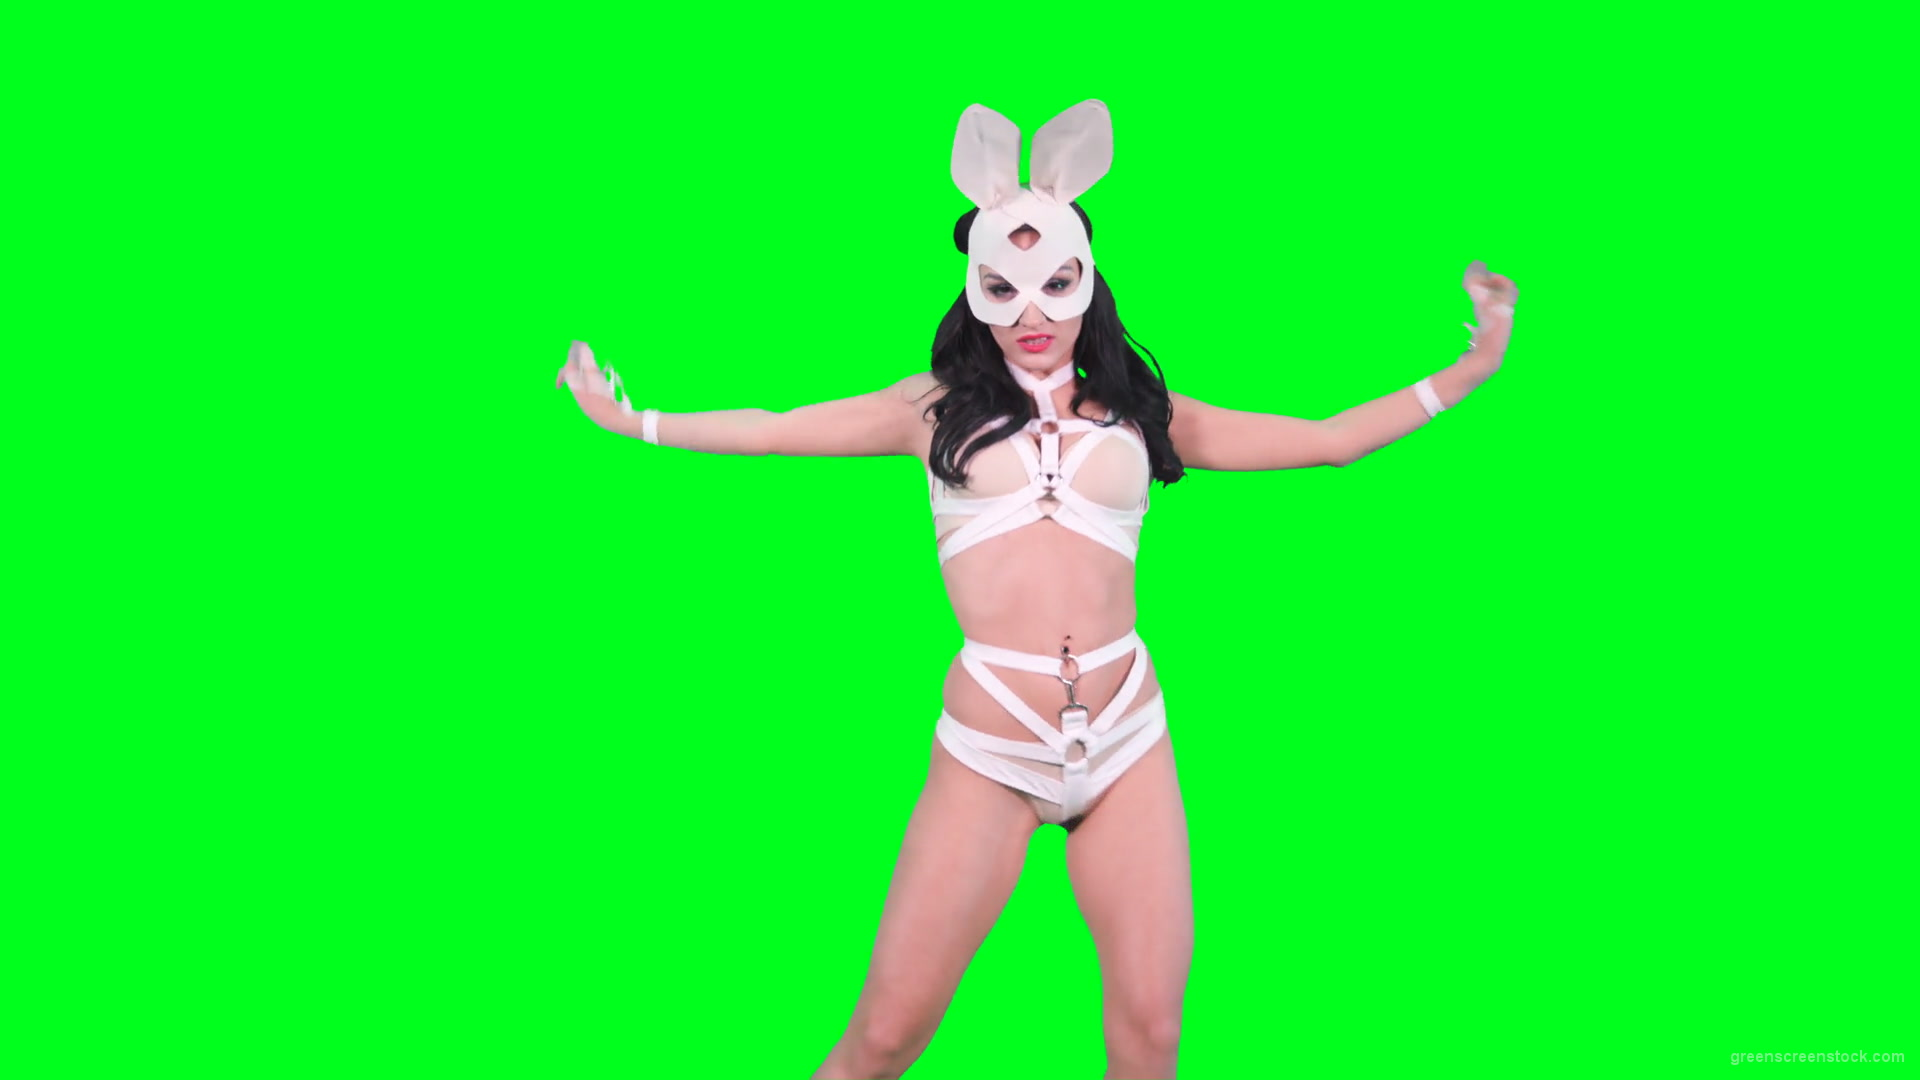 Sexy-bunny-girl-in-rabbit-costume-on-green-screen-4K-Video-Footage-1920_007 Green Screen Stock